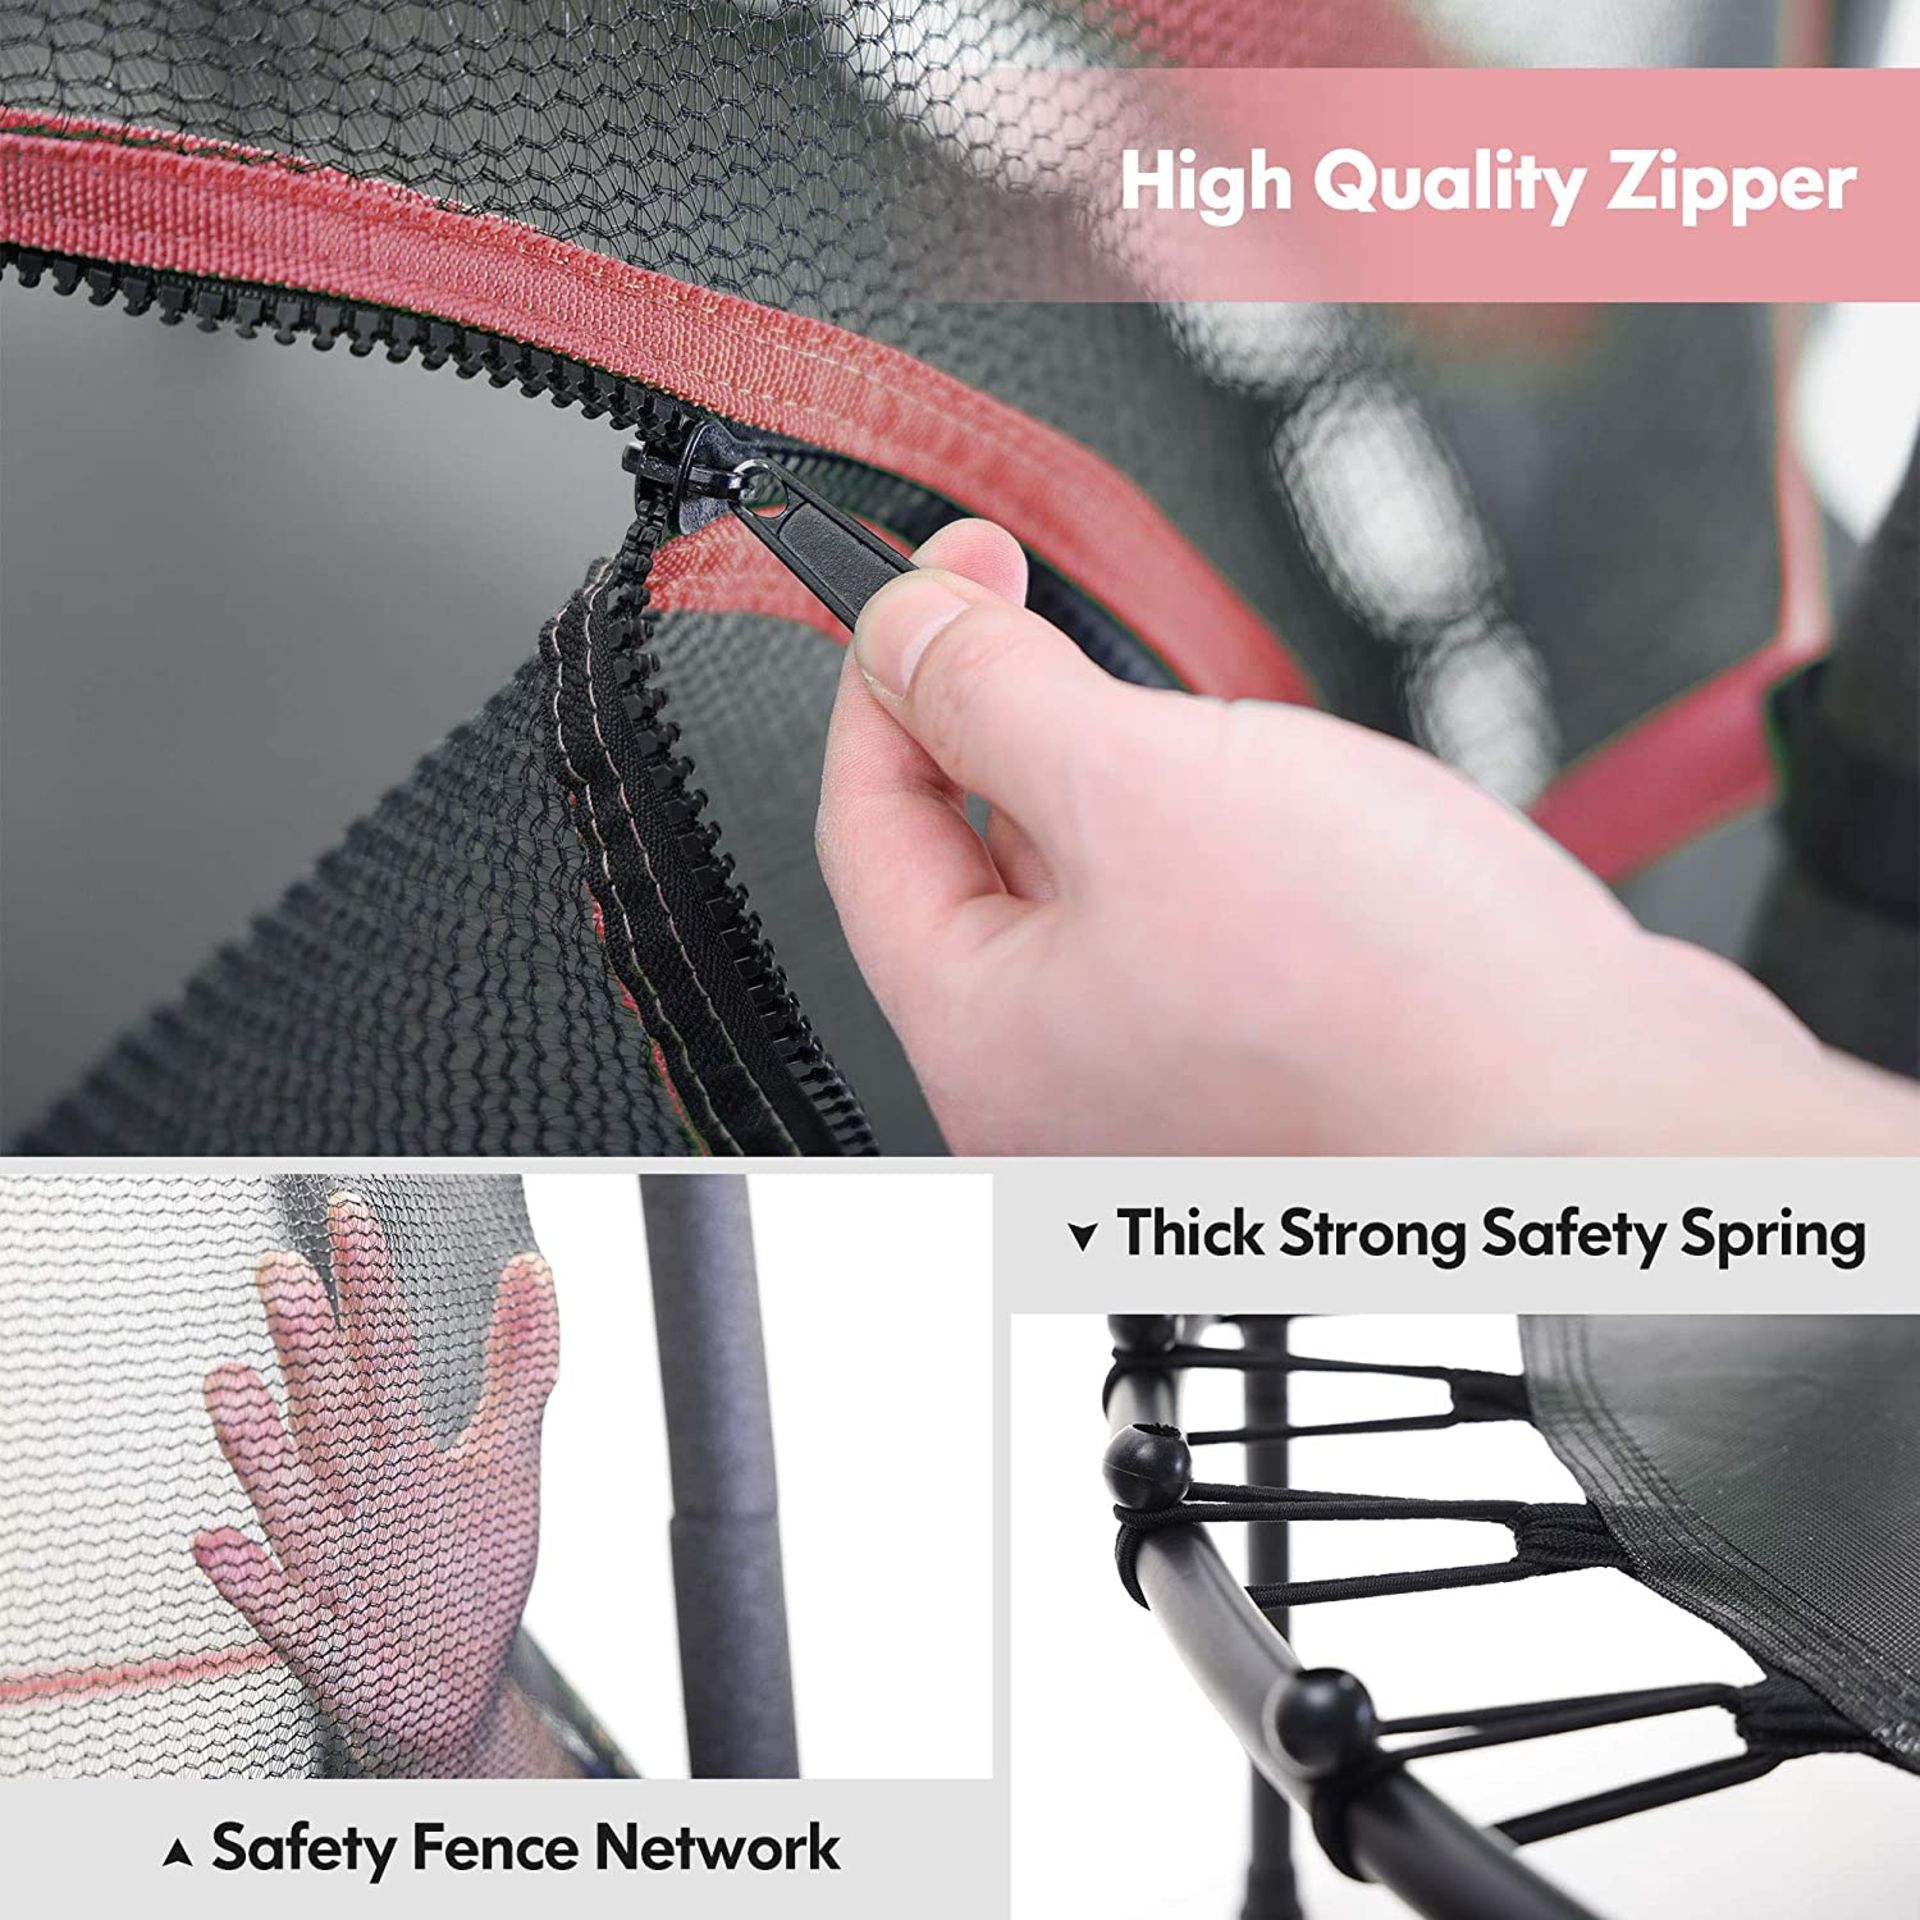 Brand new 54” Trampoline for Kids, Mini Toddler Trampoline with Safety Enclosure, Indoor & Outdoor - Image 3 of 3